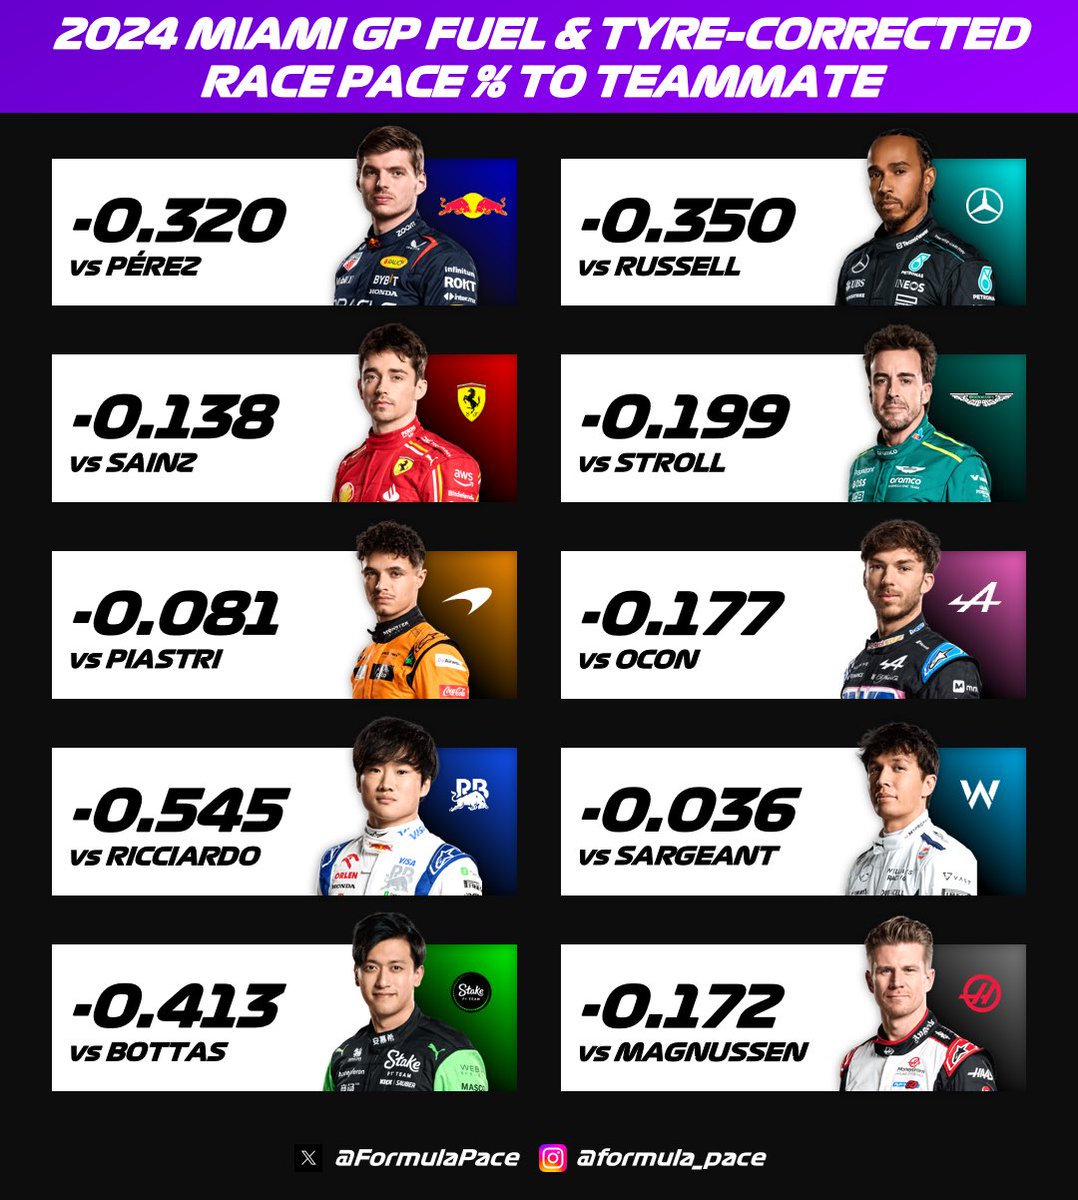 2024 Miami GP Race Pace to Teammate 👇